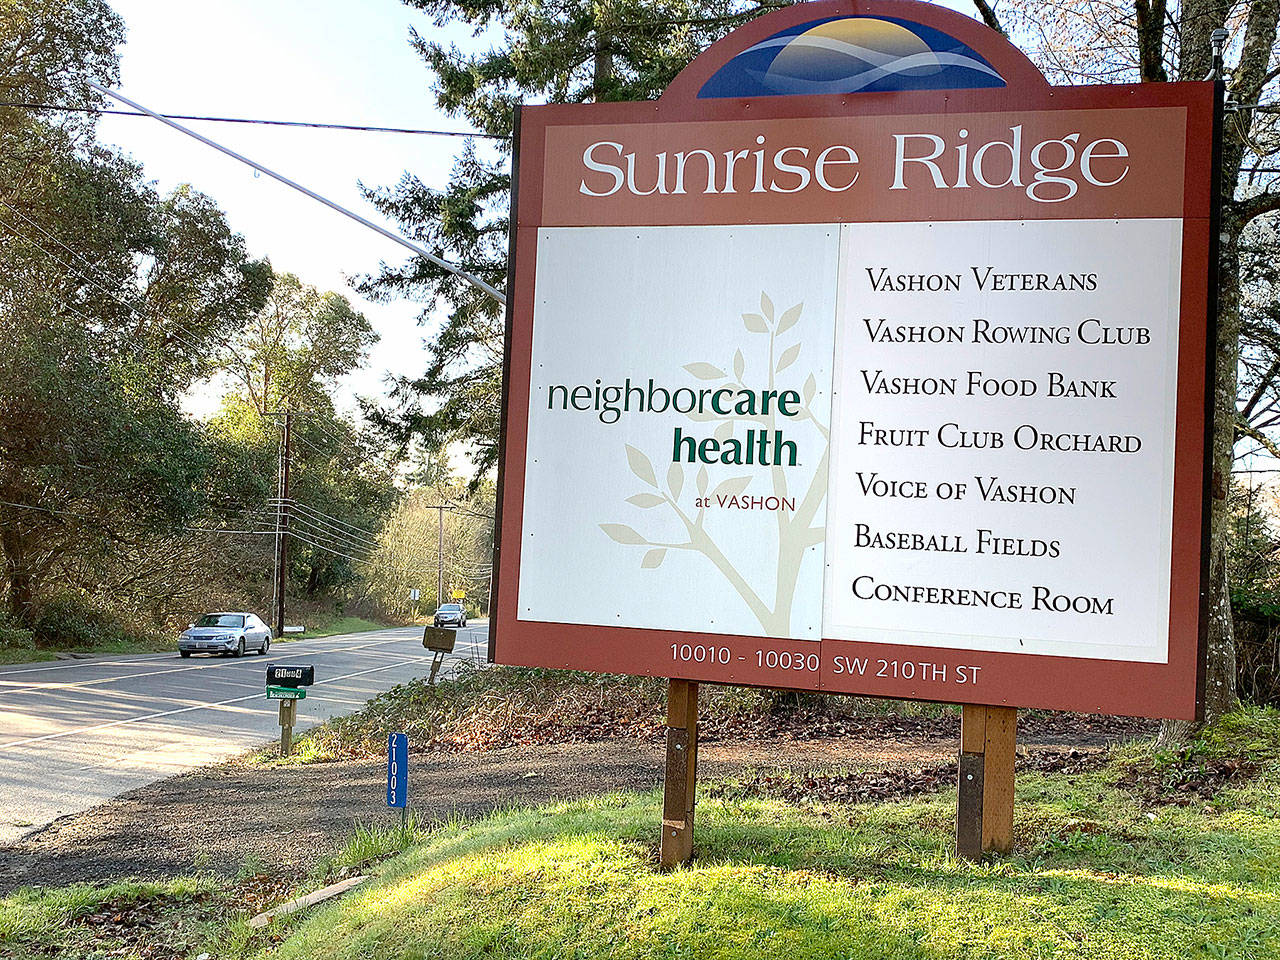 The sign for Neighborcare Health, the entrance to Sunrise Ridge, is seen along Vashon Highway in February. (Kevin Opsahl/Staff Photo)